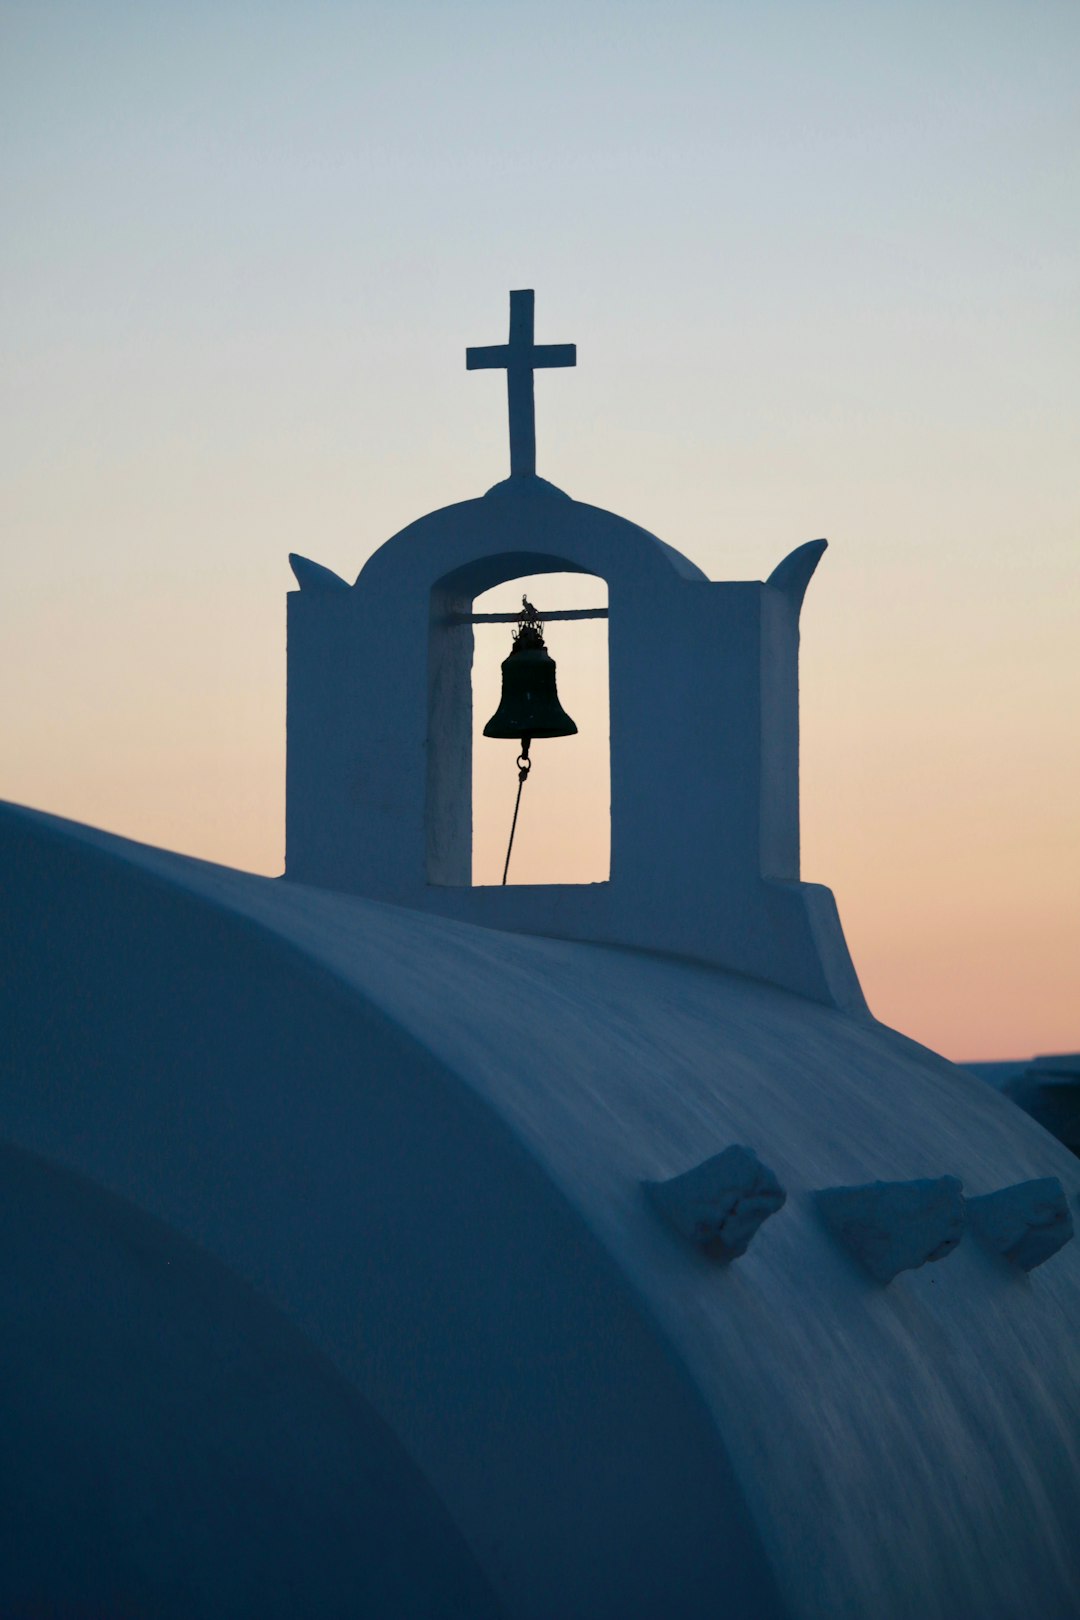 travelers stories about Church in Oia, Greece